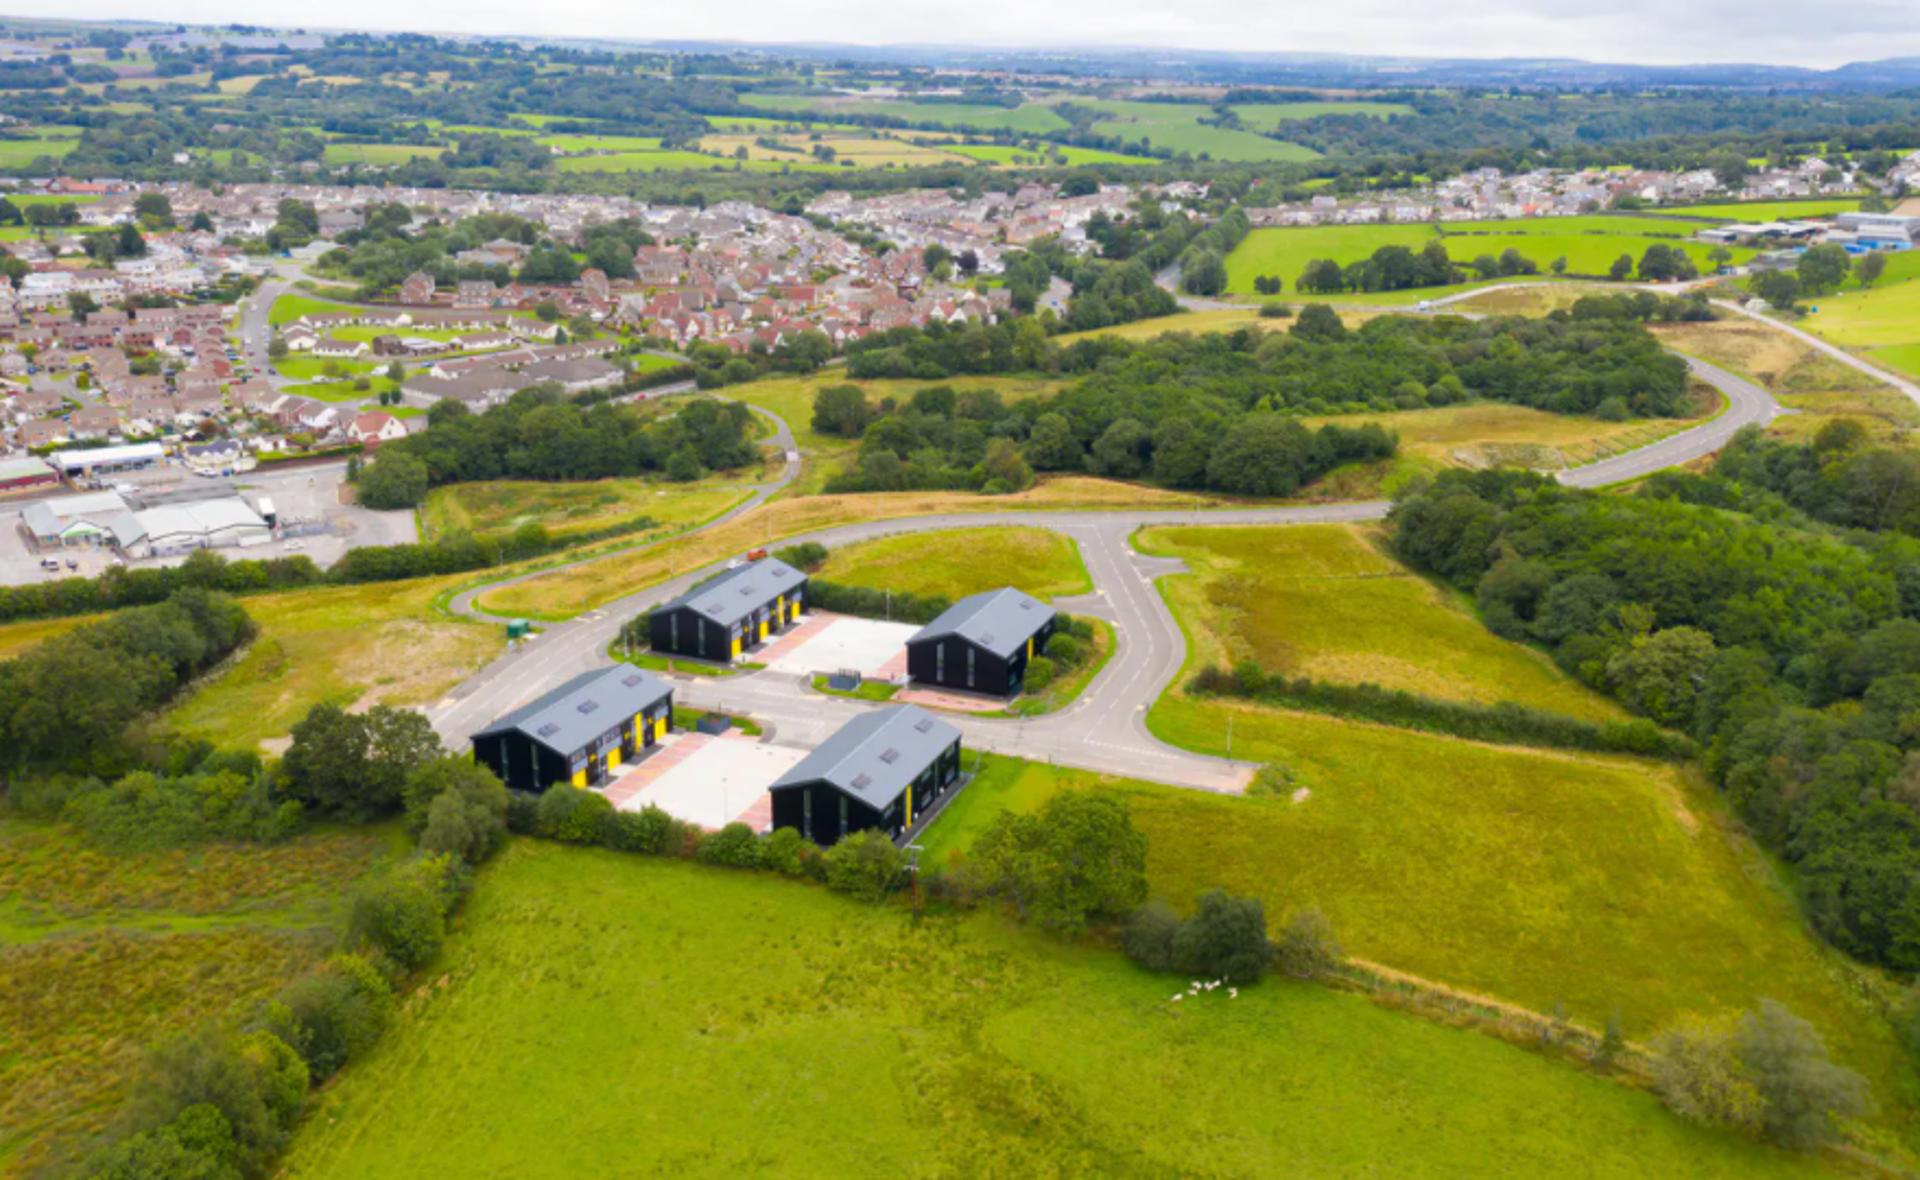 Welsh Government puts new Caerphilly industrial site up for sale